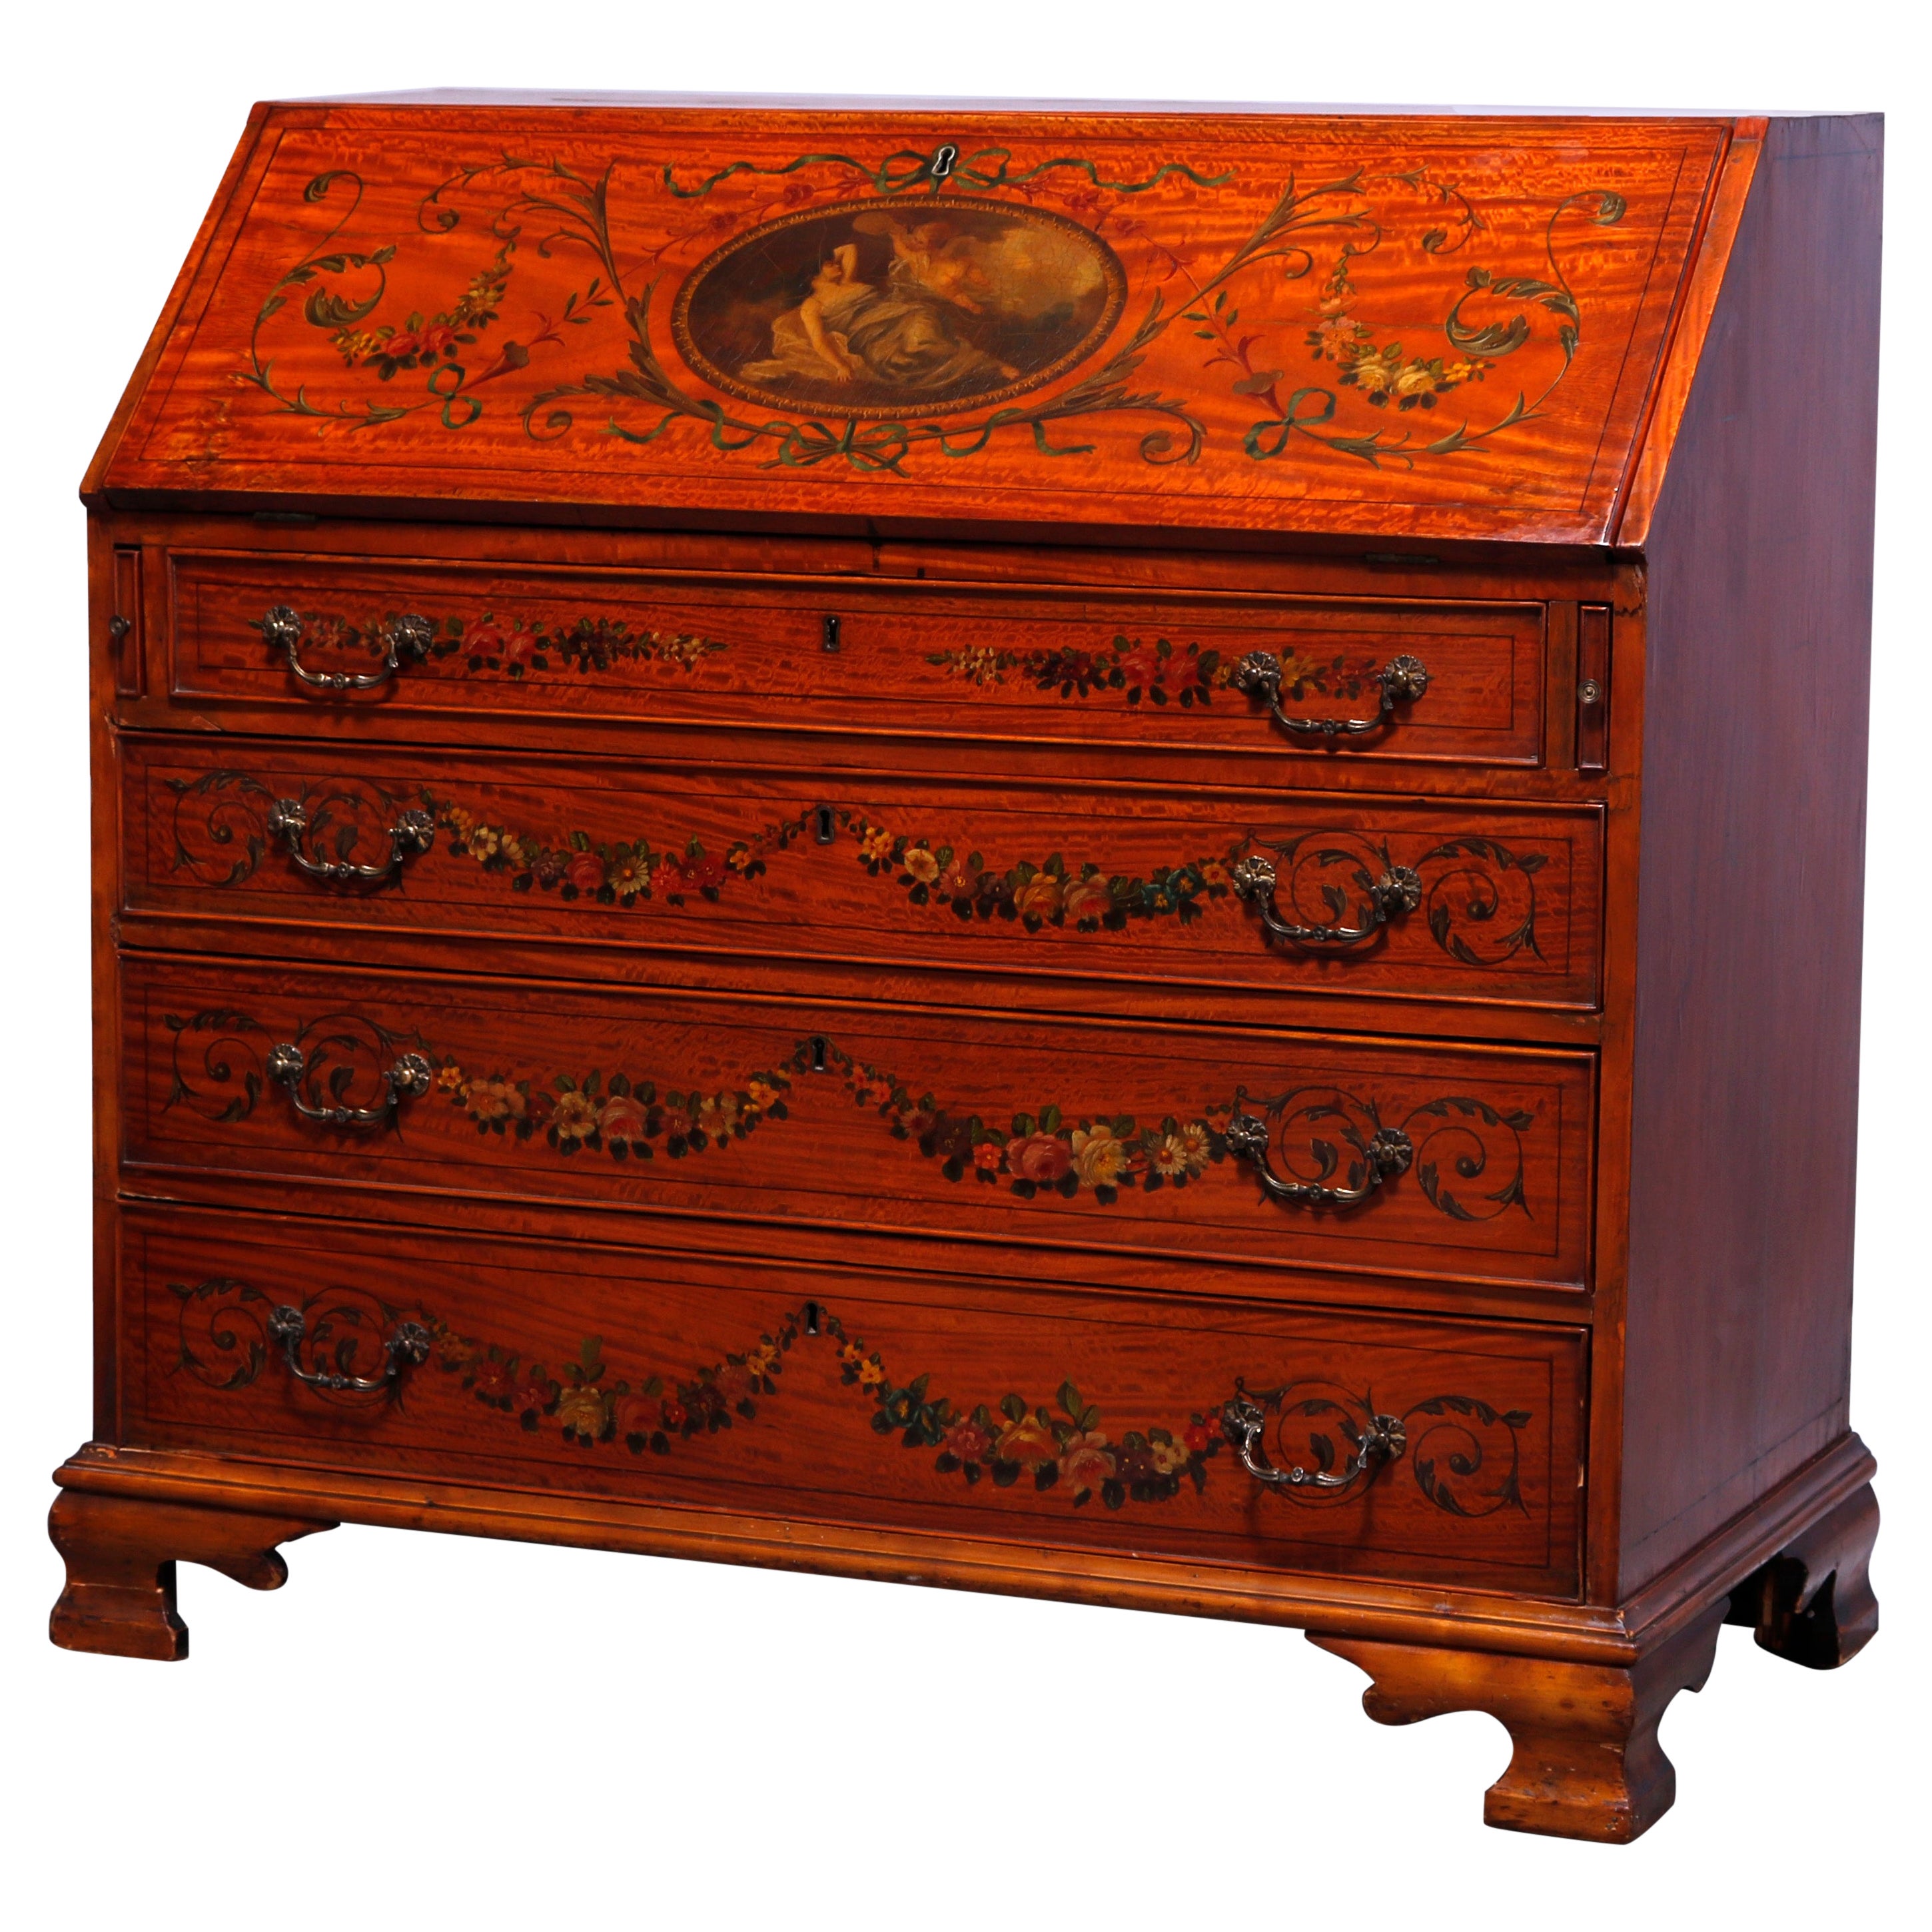 Antique English Adams Decorated Satinwood Drop-Front Desk, 18th-19th C For Sale